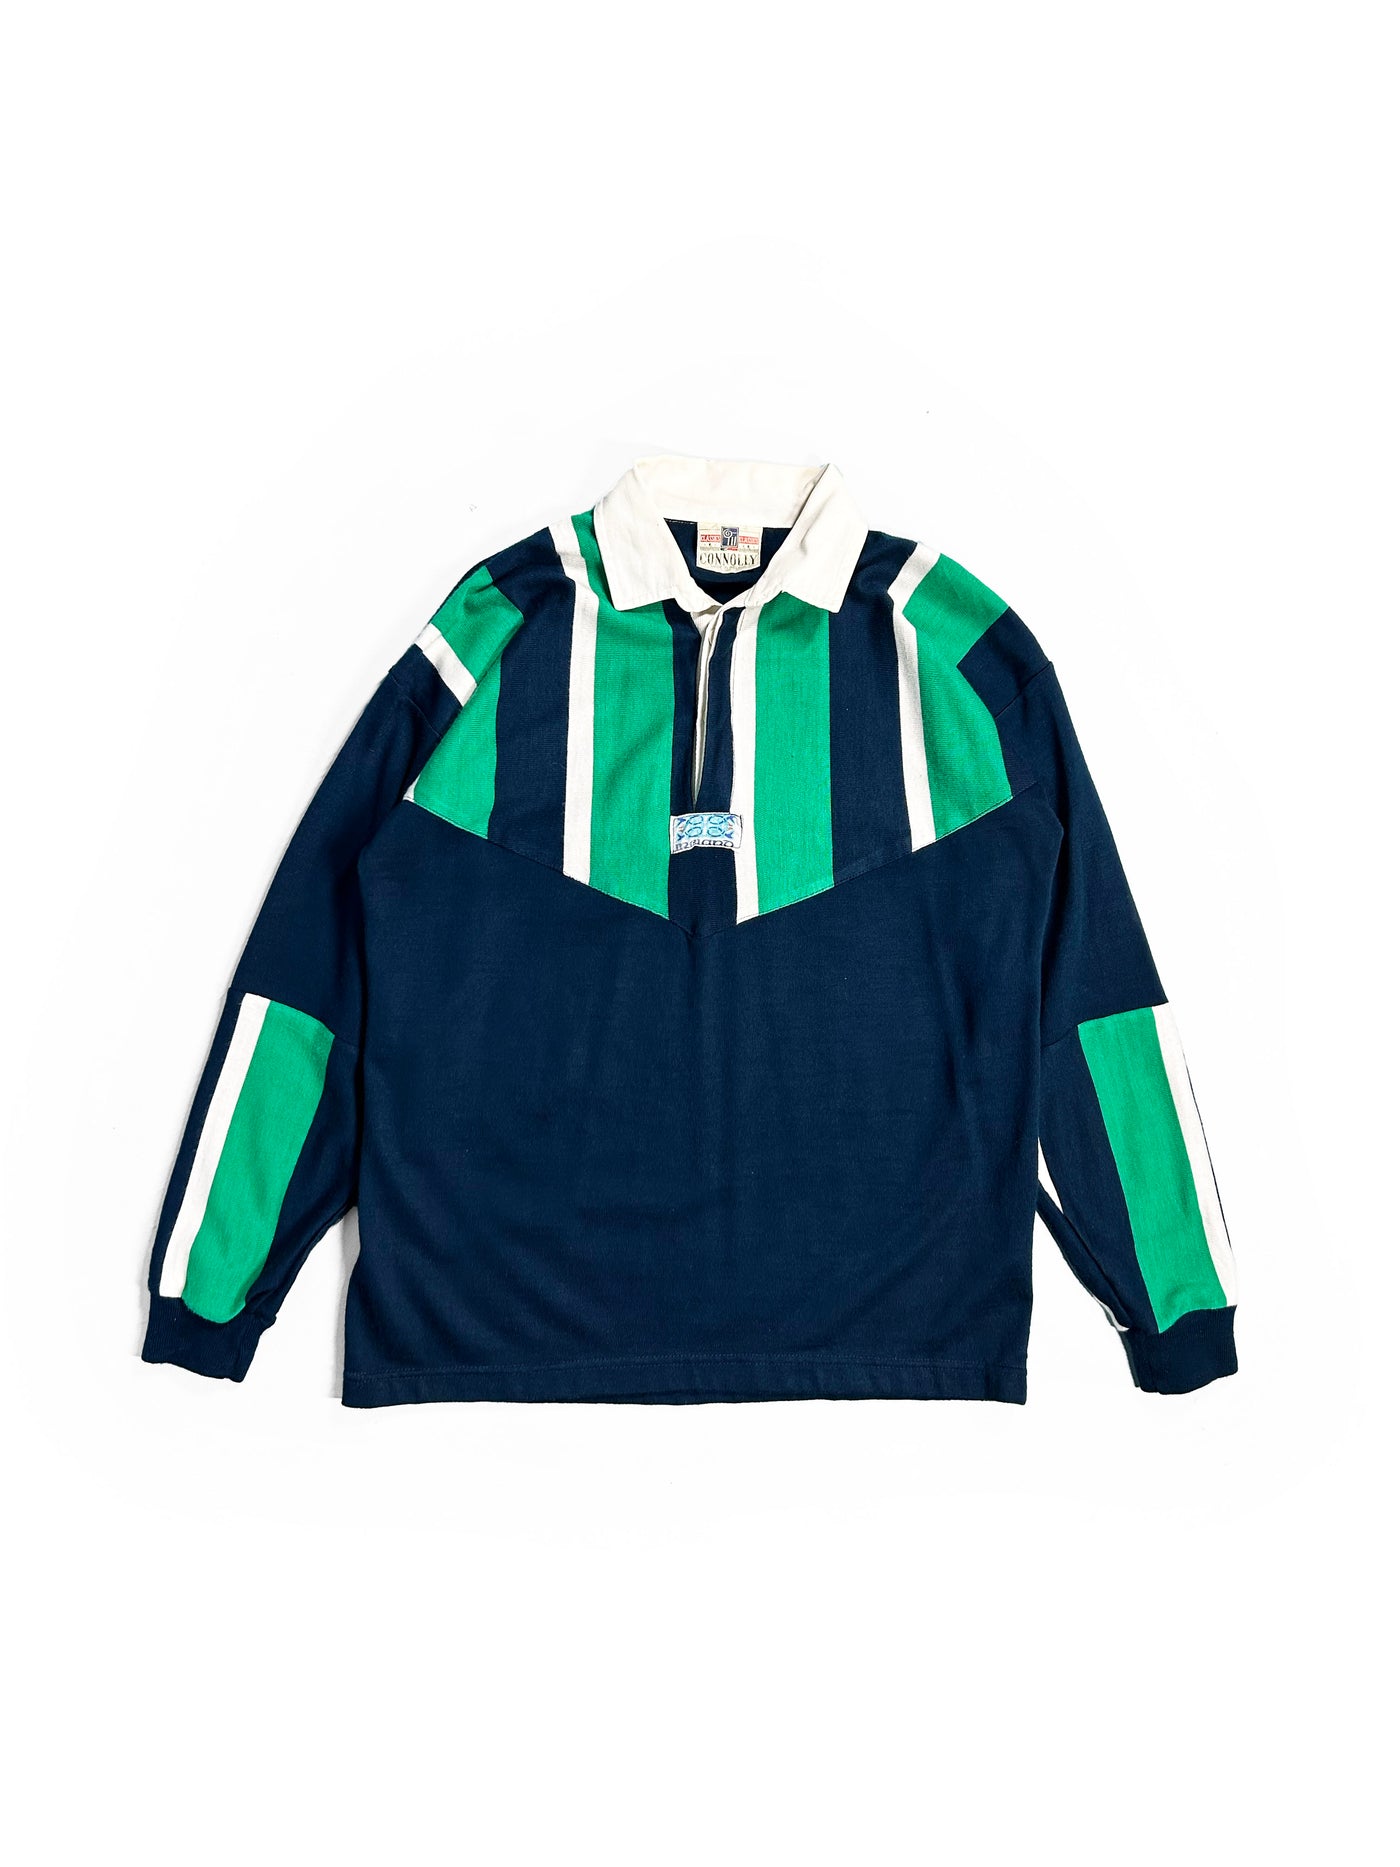 Vintage 90s Connolly Ireland Rugby Shirt